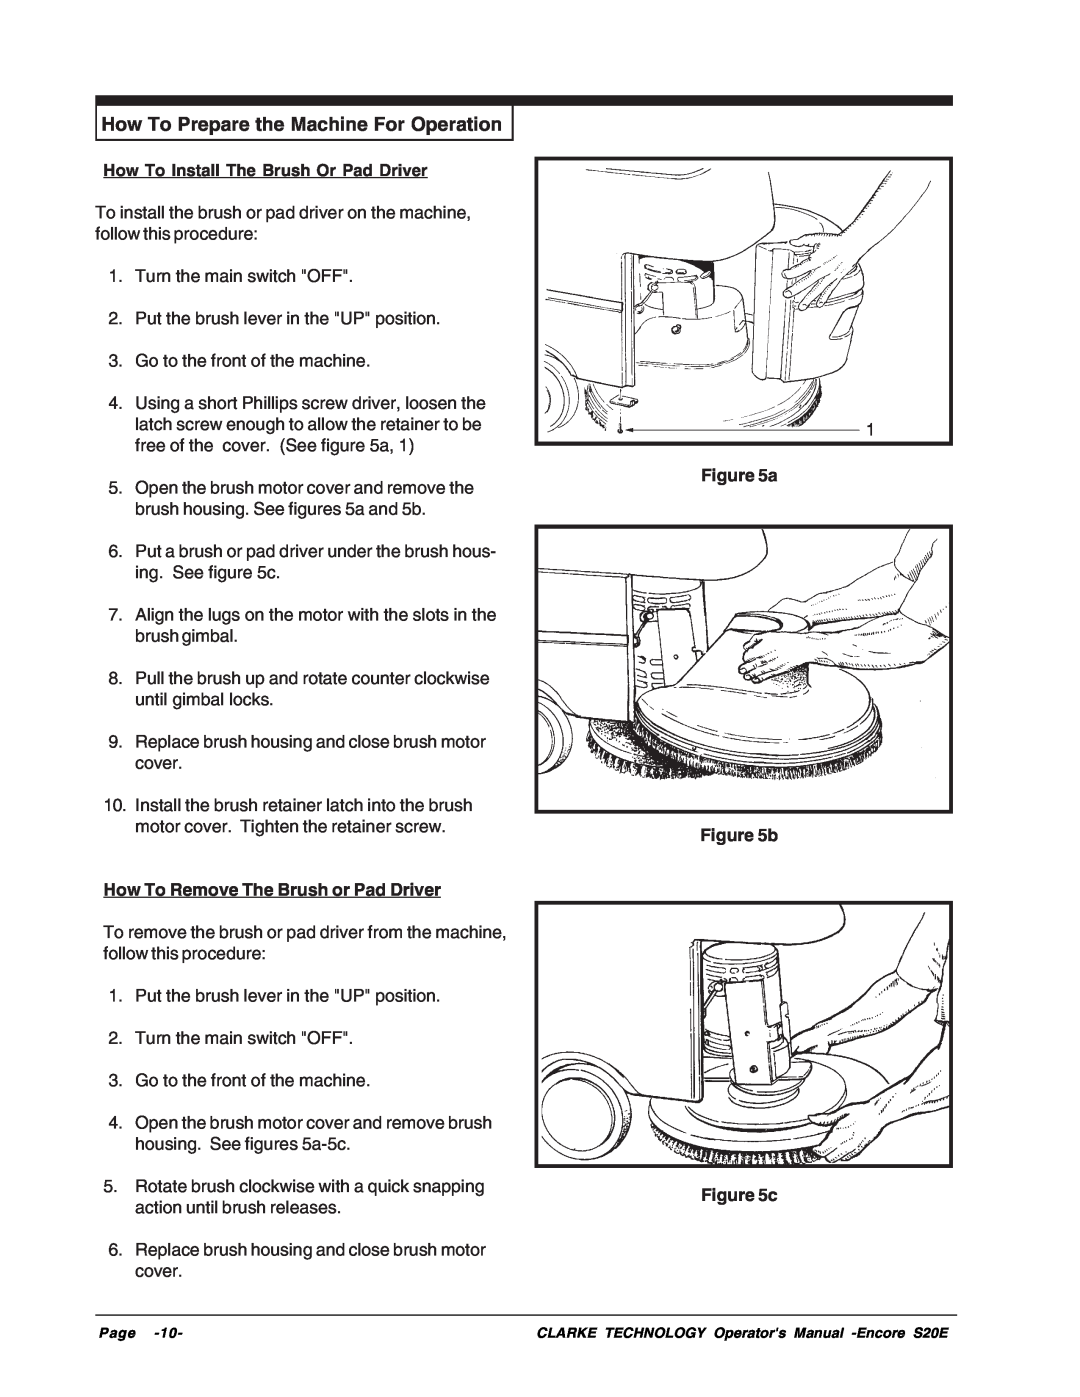 Clarke S20E manual How To Prepare the Machine For Operation, How To Install The Brush Or Pad Driver, a b c 